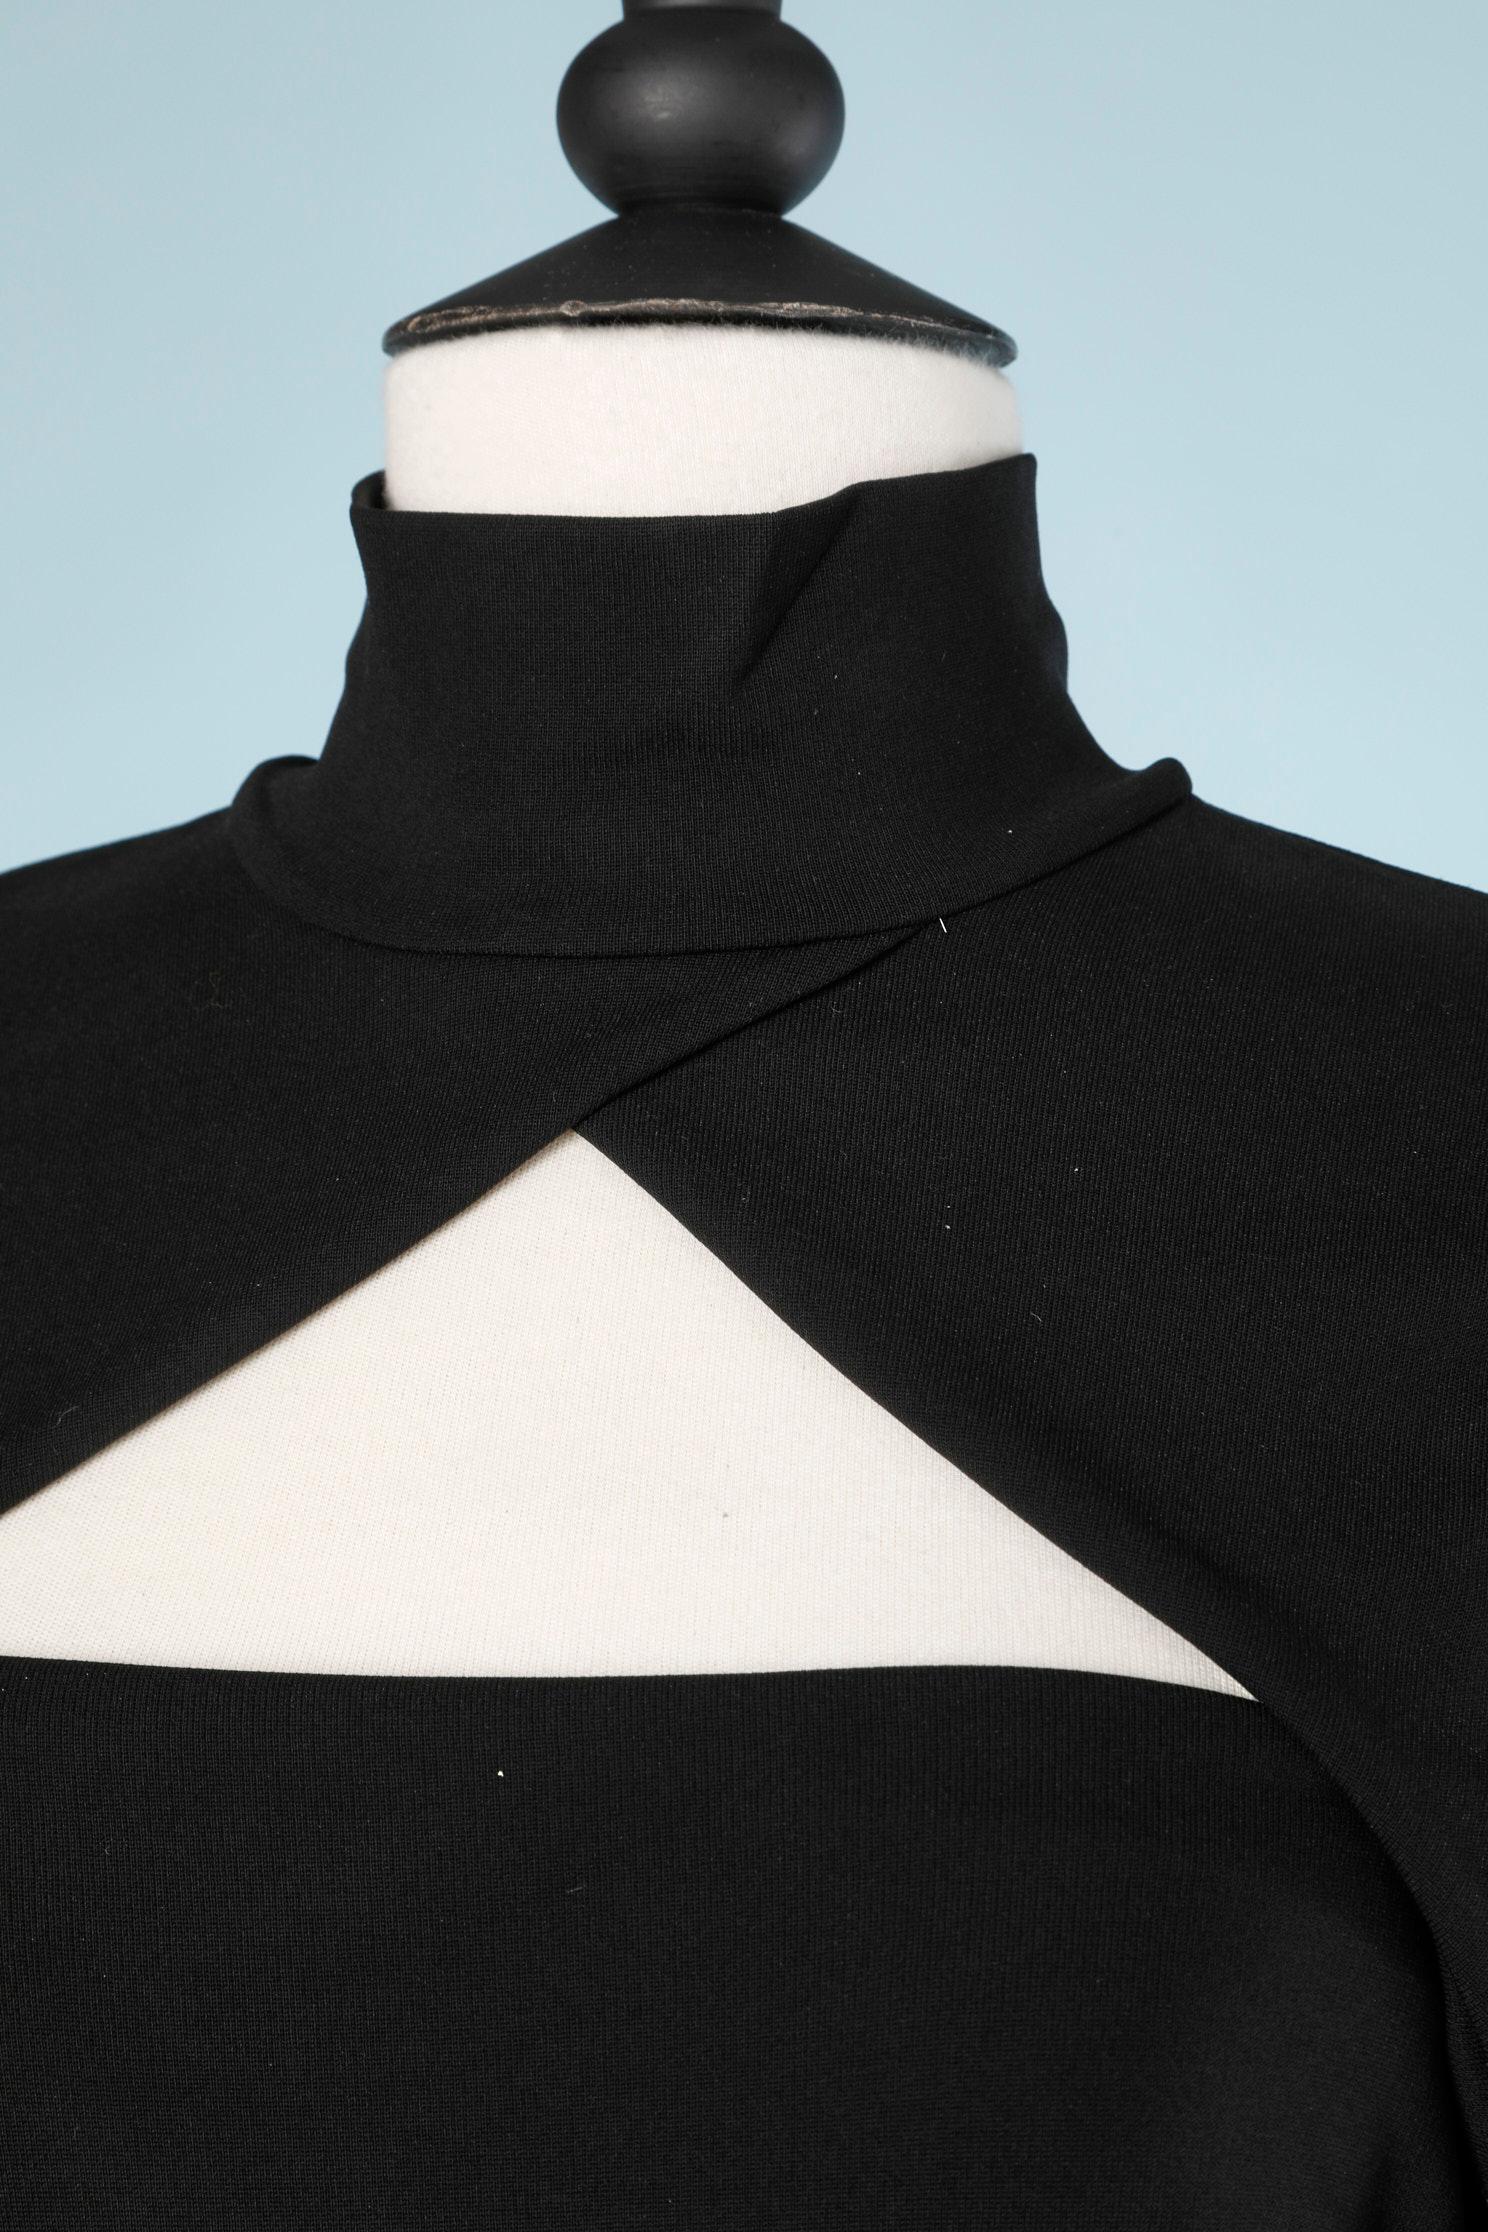 Black jersey dress with triangle shape neckline and high collar 